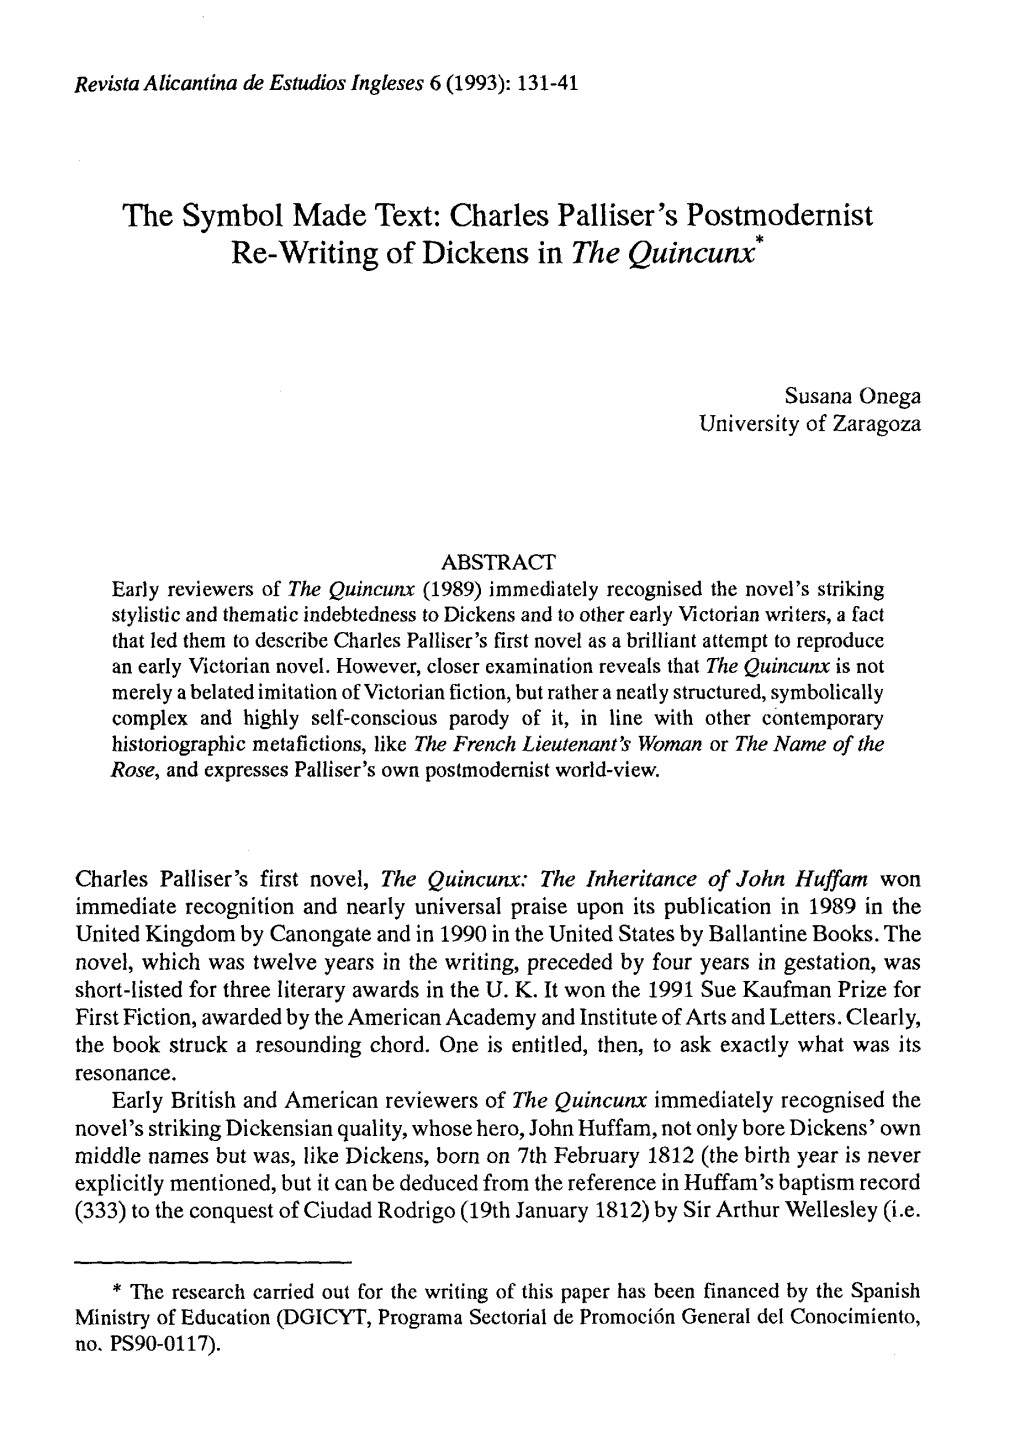 Charles Palliser's Postmodernist Re-Writing of Dickens in the Quincunx*